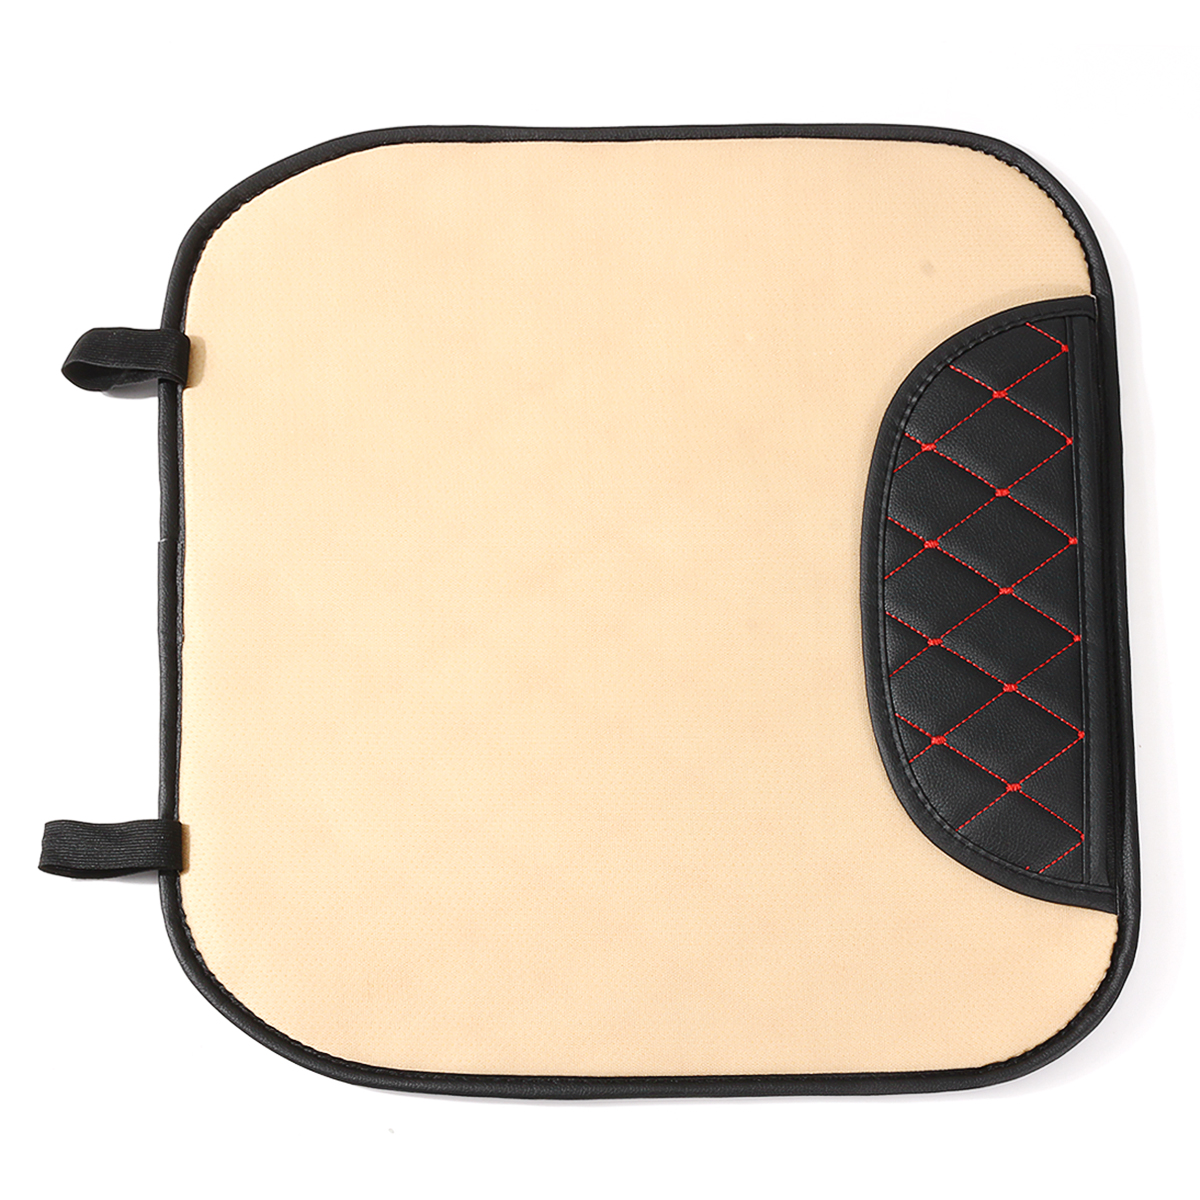 Leather Car Front Seat Cushion Covers Breathable Chair Protector Seat Pad Mat with Storage Bag - Auto GoShop